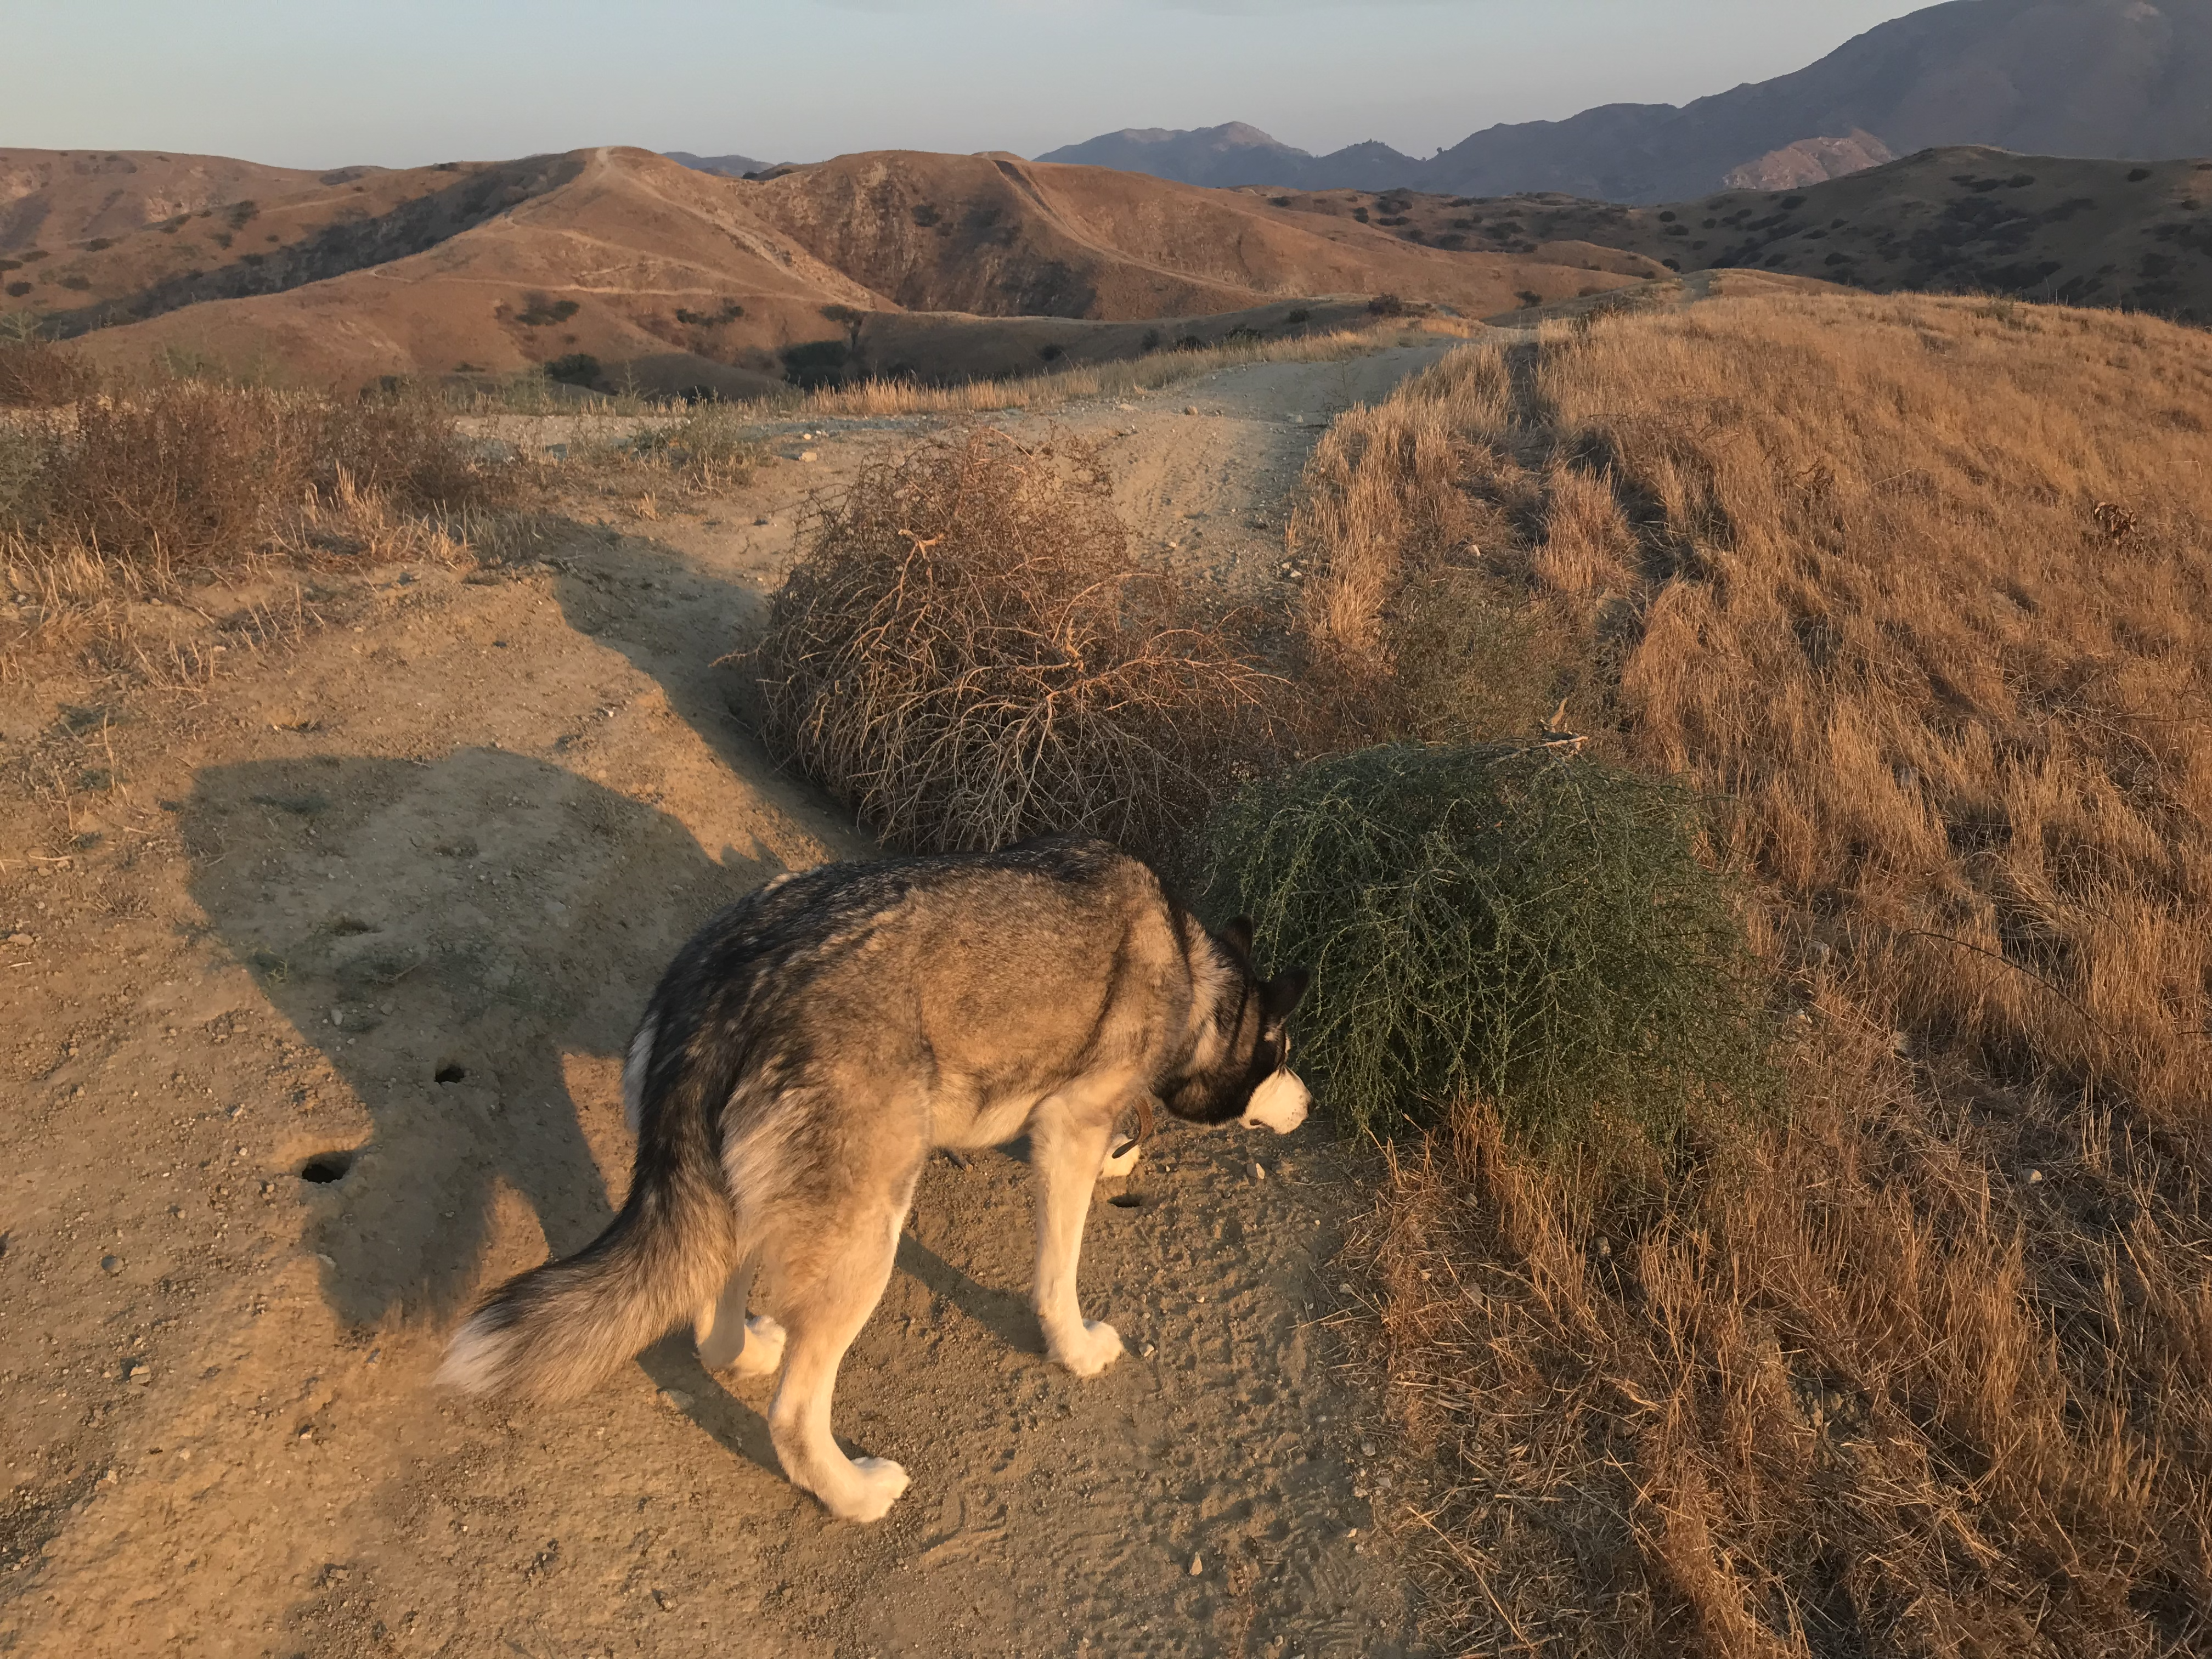 A black and white husky smelling green and brown tumbleweeds in the glow of the late afternoon sun.